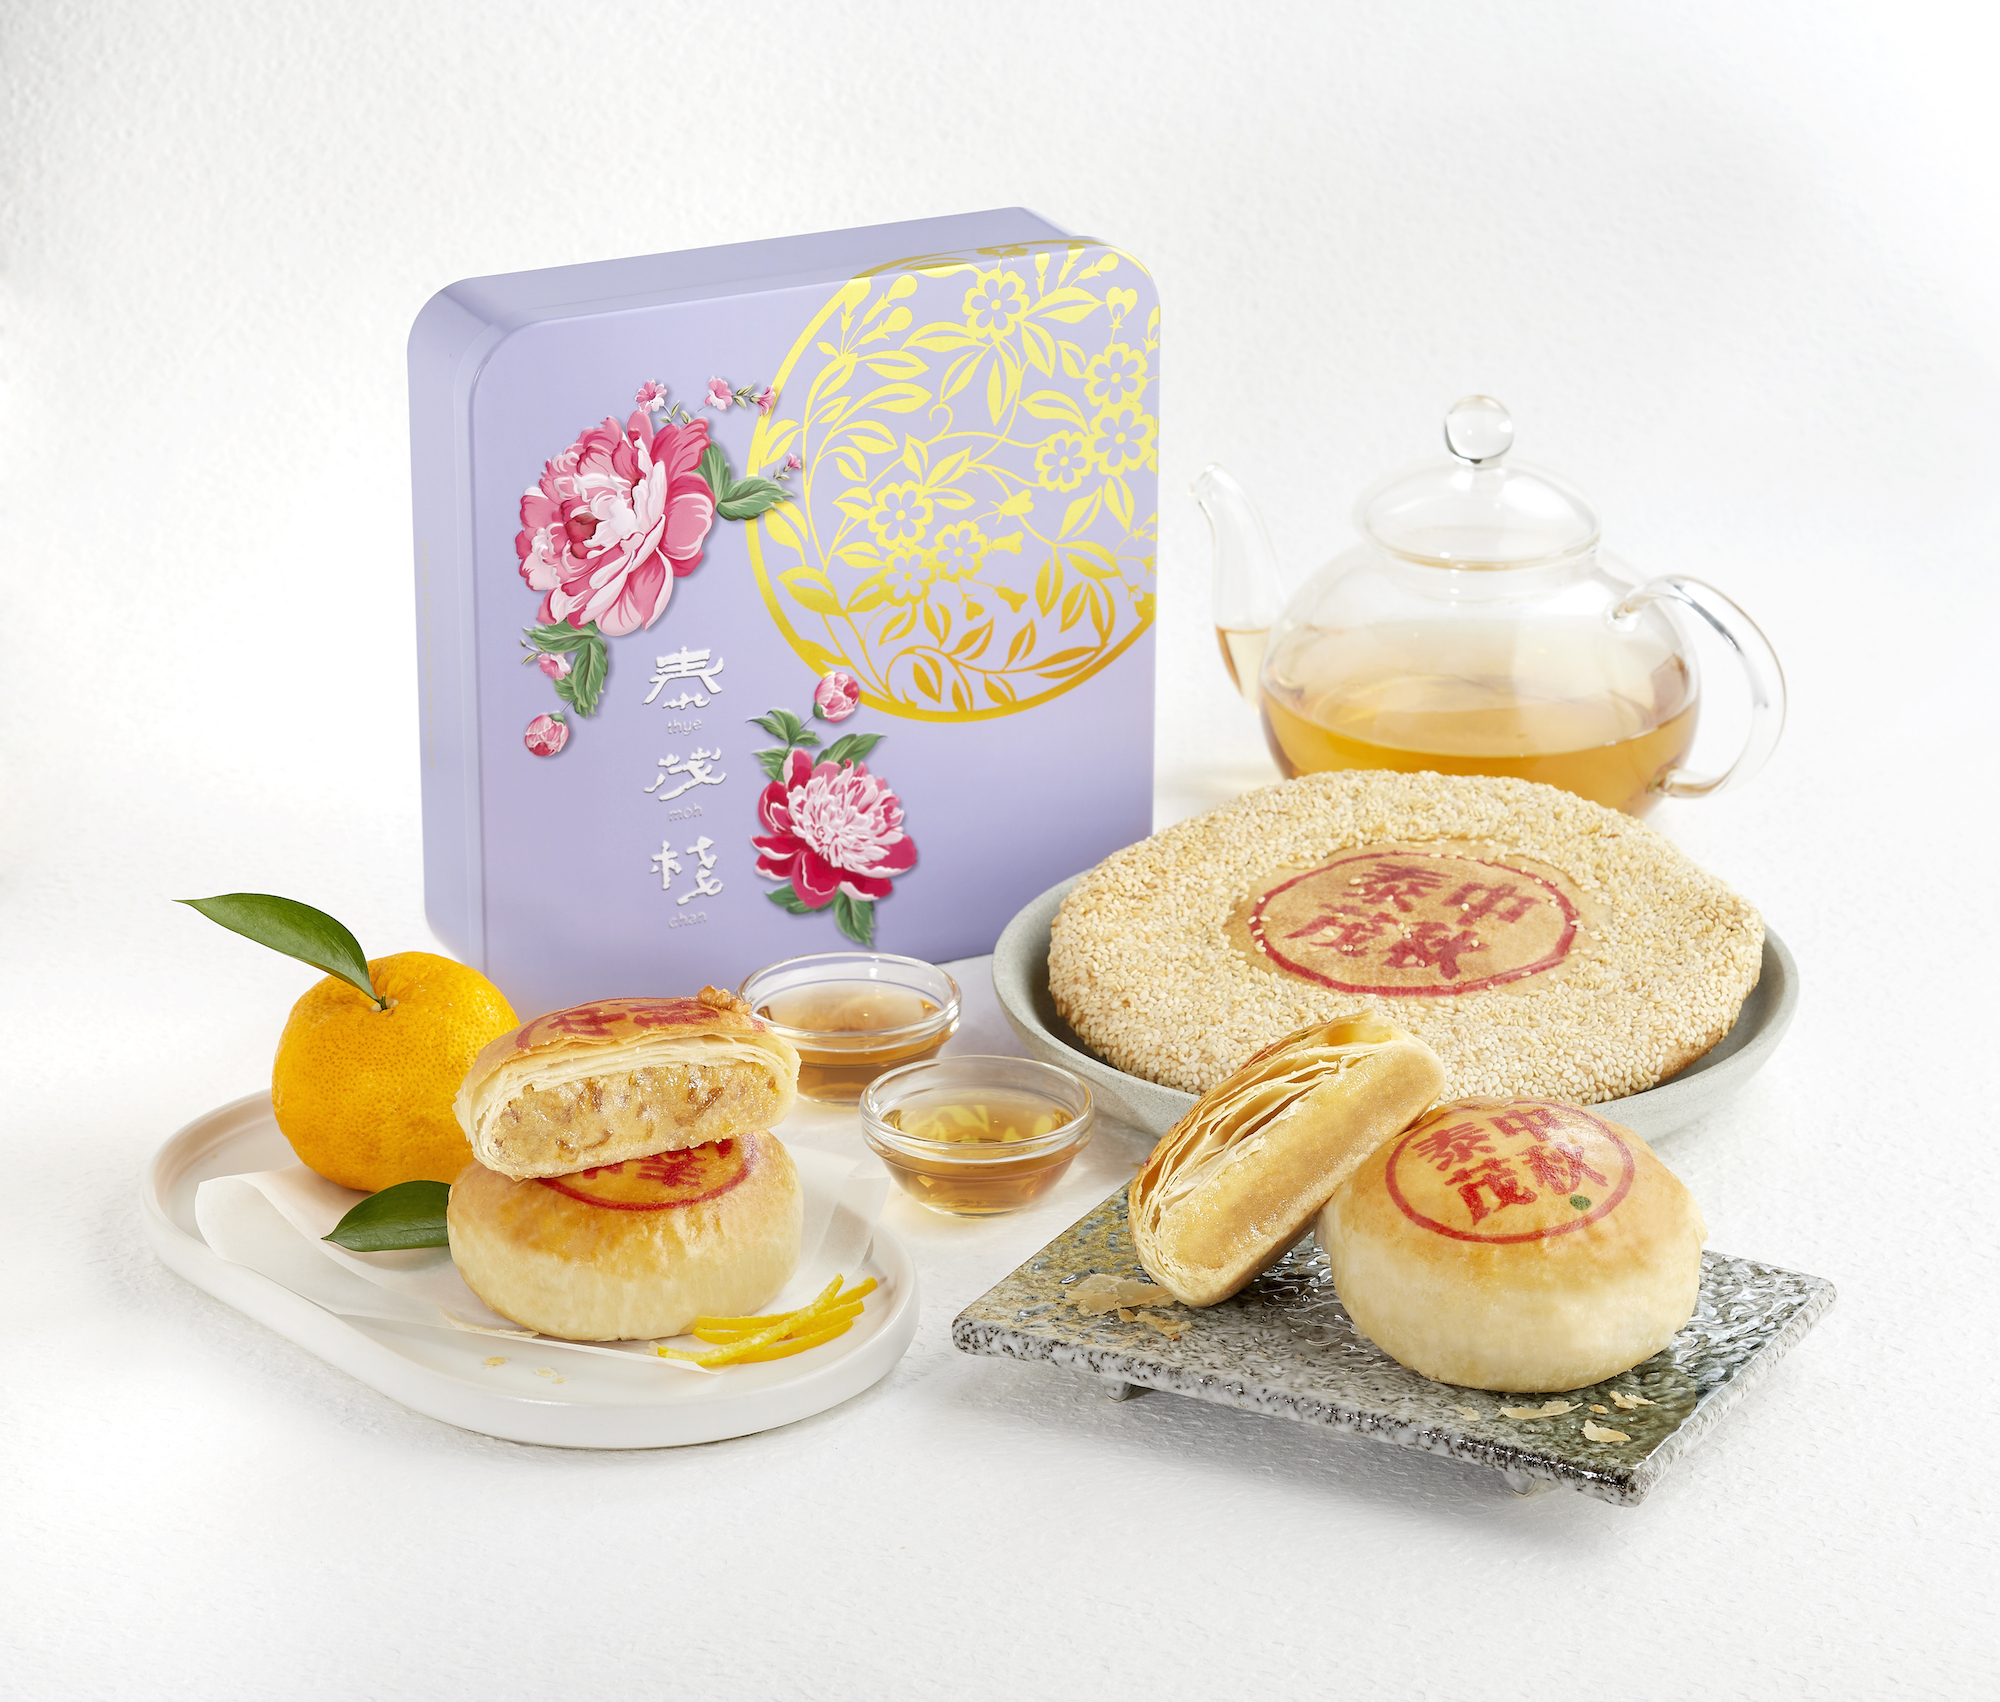 Thye Moh Chan Injects A Modern Twist To Its Handcrafted Teochew Mooncakes